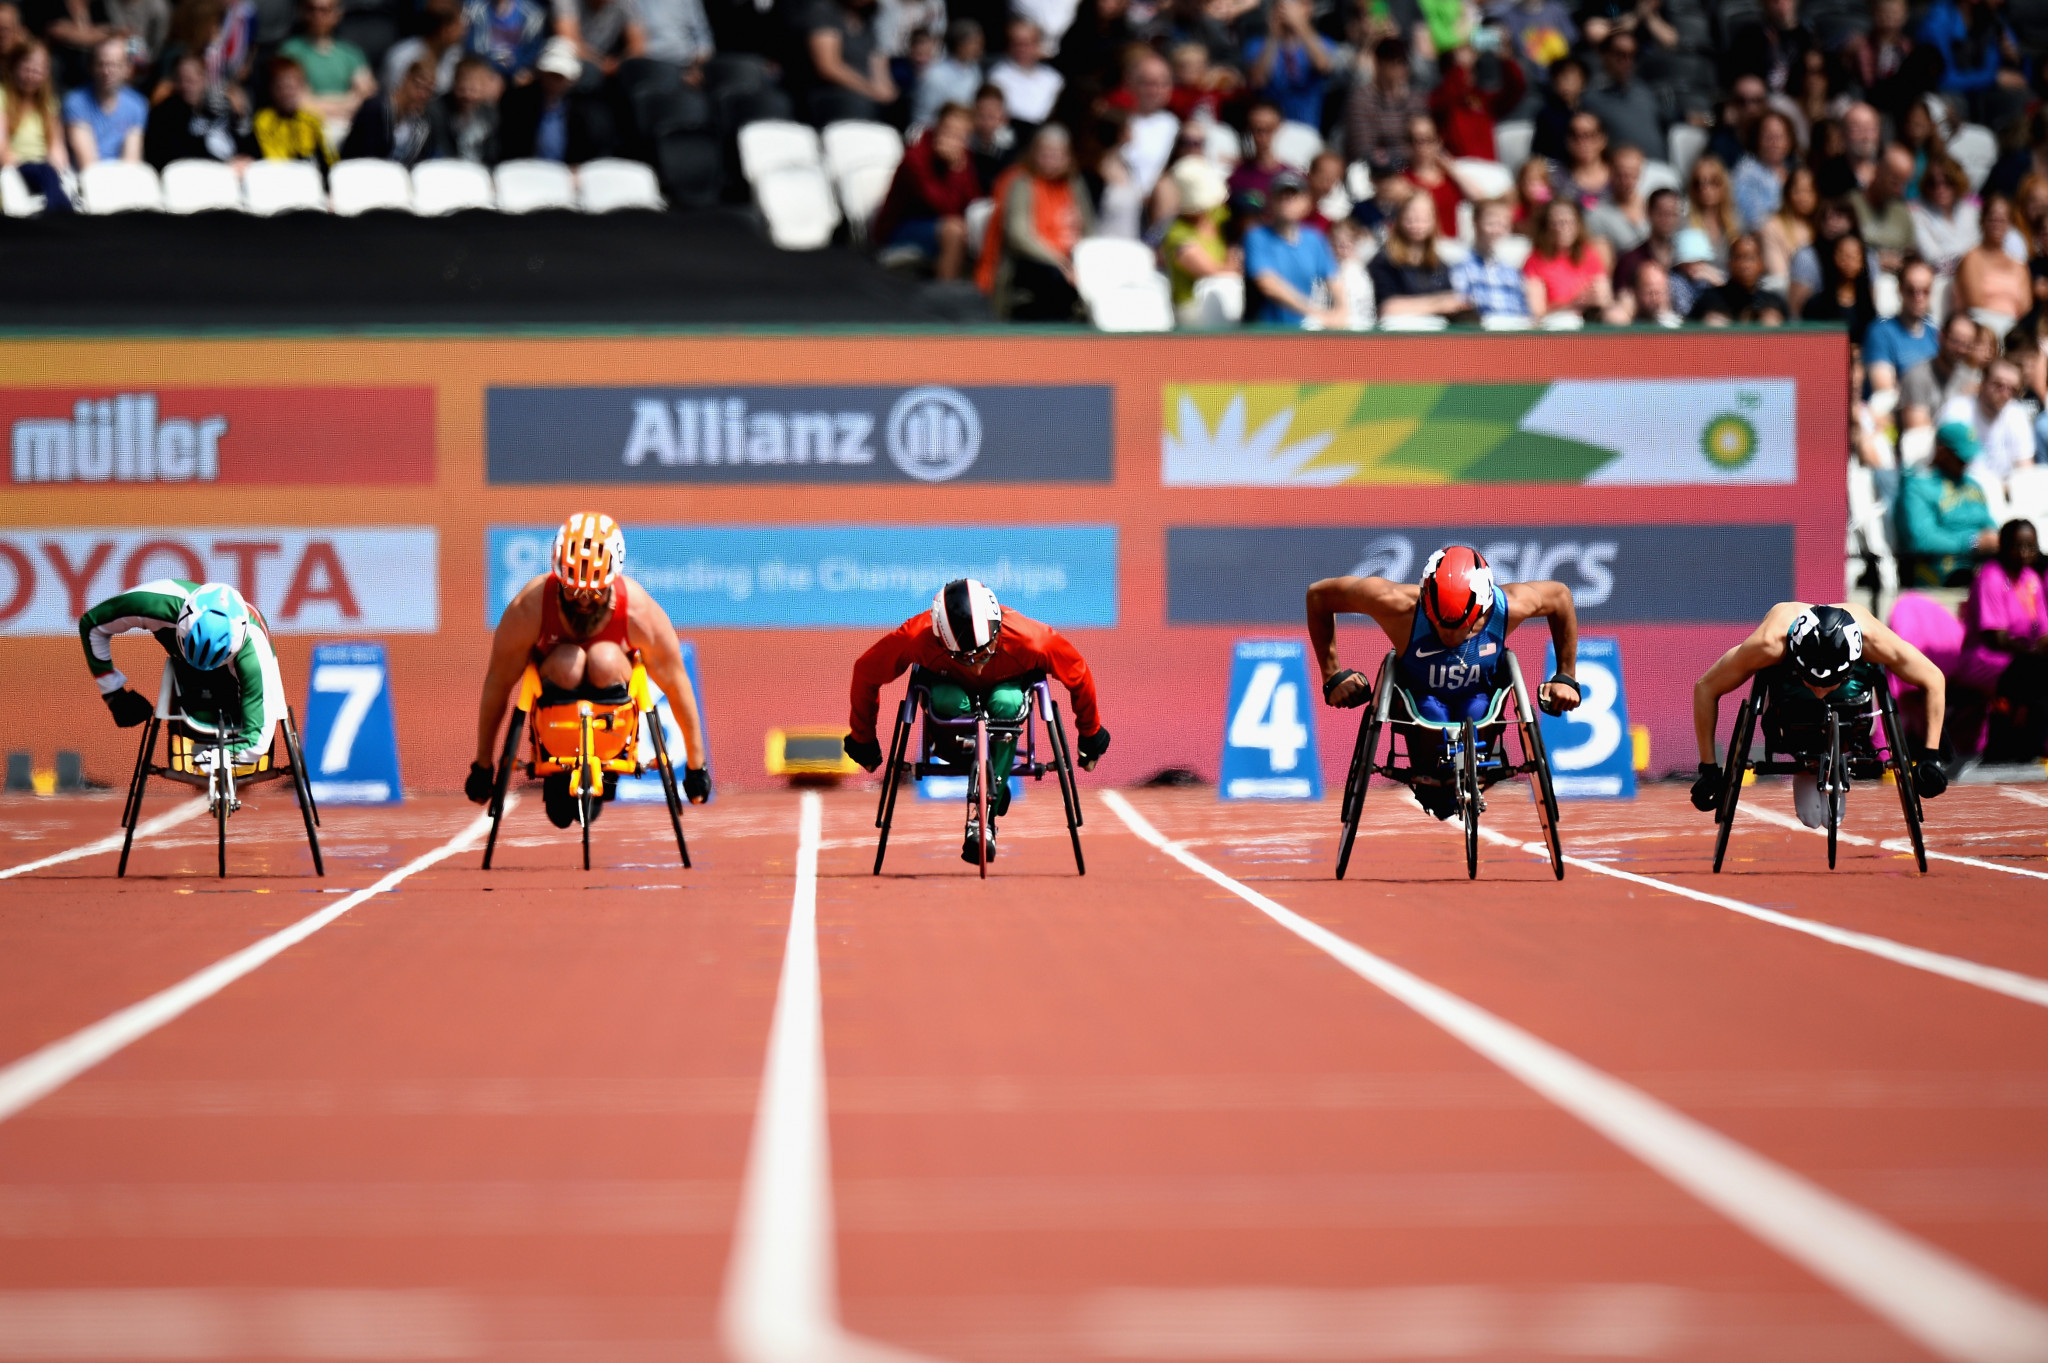 More than 300,000 tickets were sold for the 2017 IPC World Para Athletics Championships in London but the momentum has been lost by UK Athletics since ©Getty Images